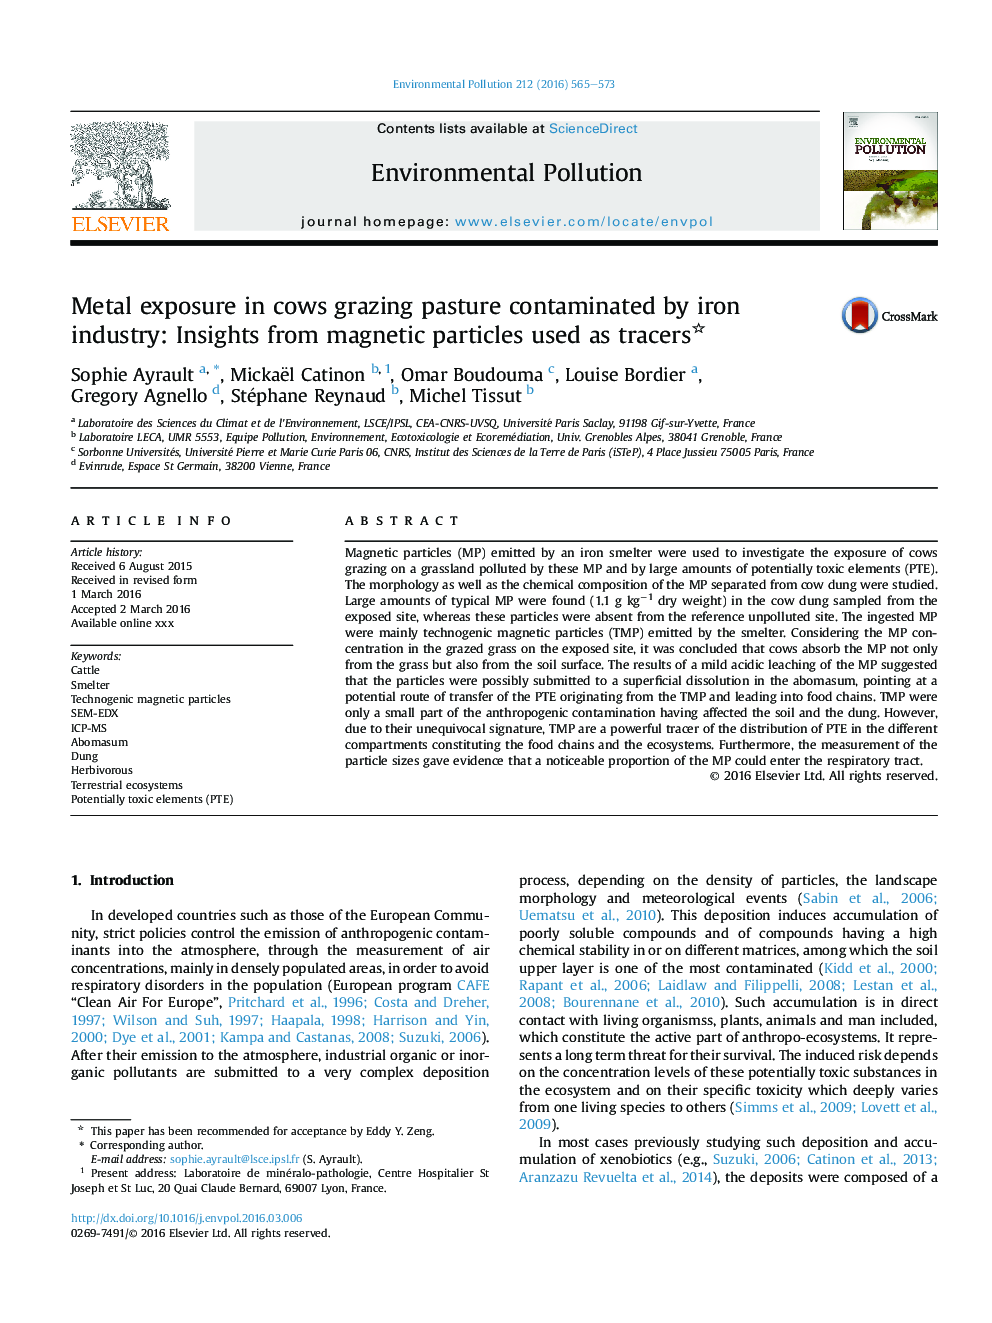 Metal exposure in cows grazing pasture contaminated by iron industry: Insights from magnetic particles used as tracers